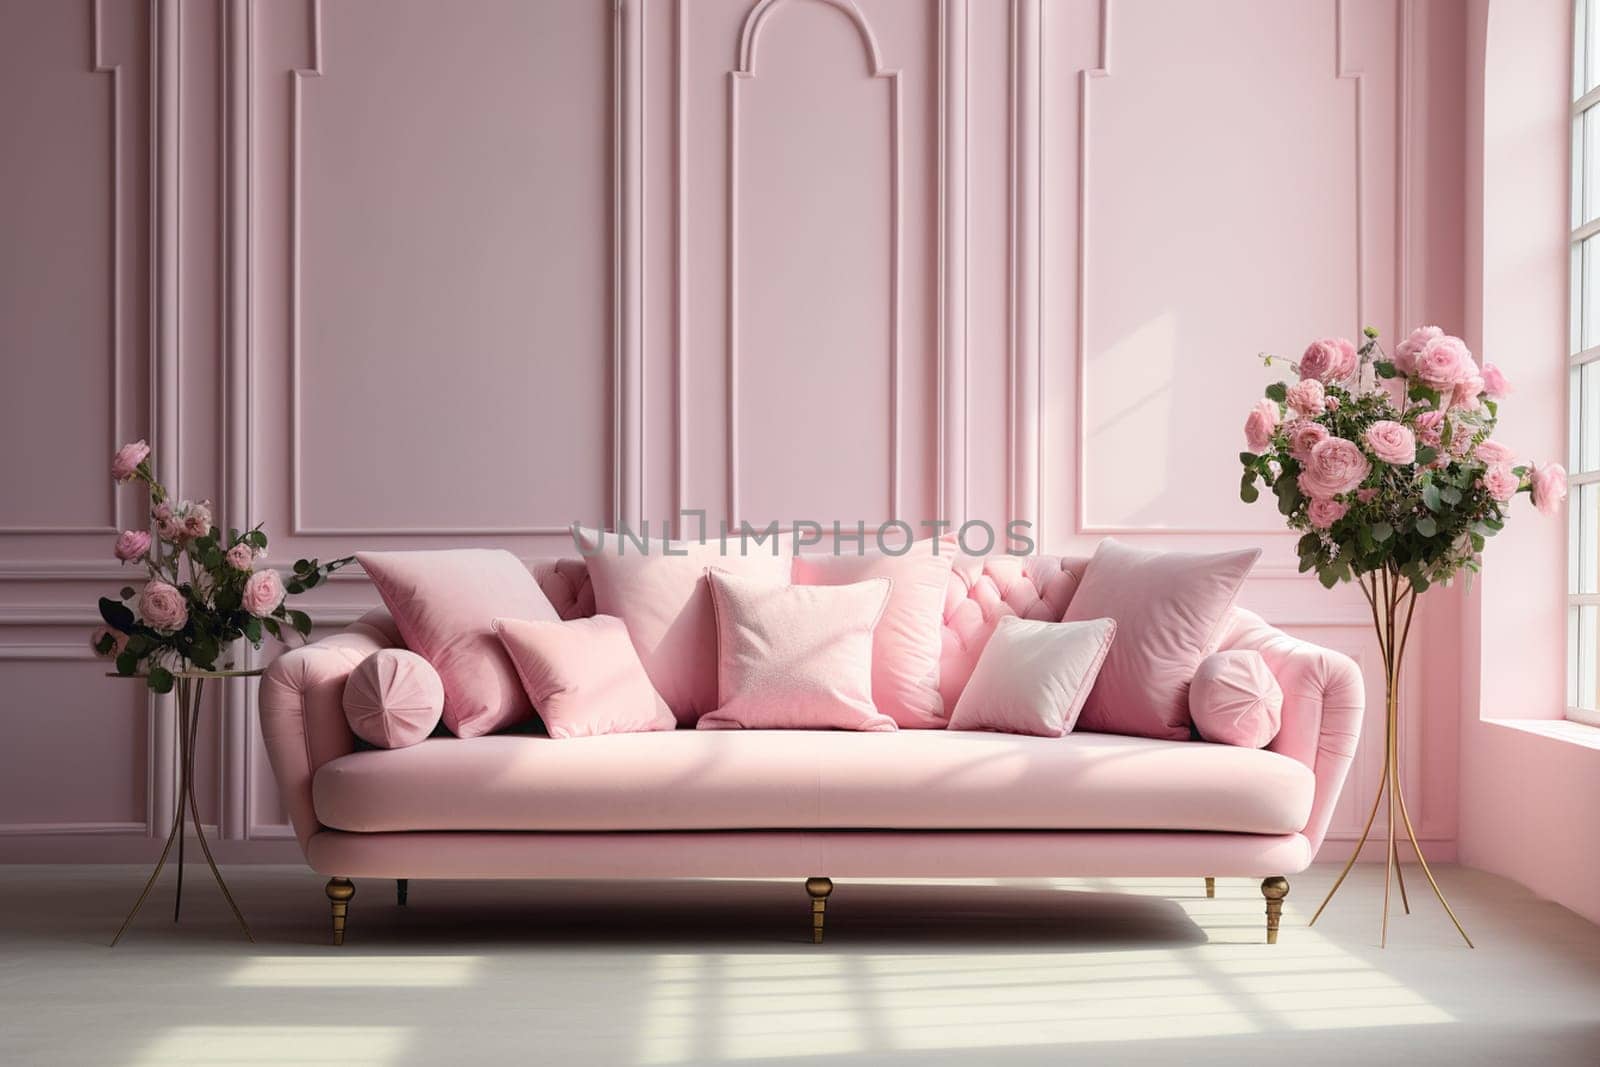 Pink velvet couch in the room with grey walls and flowers. High quality photo